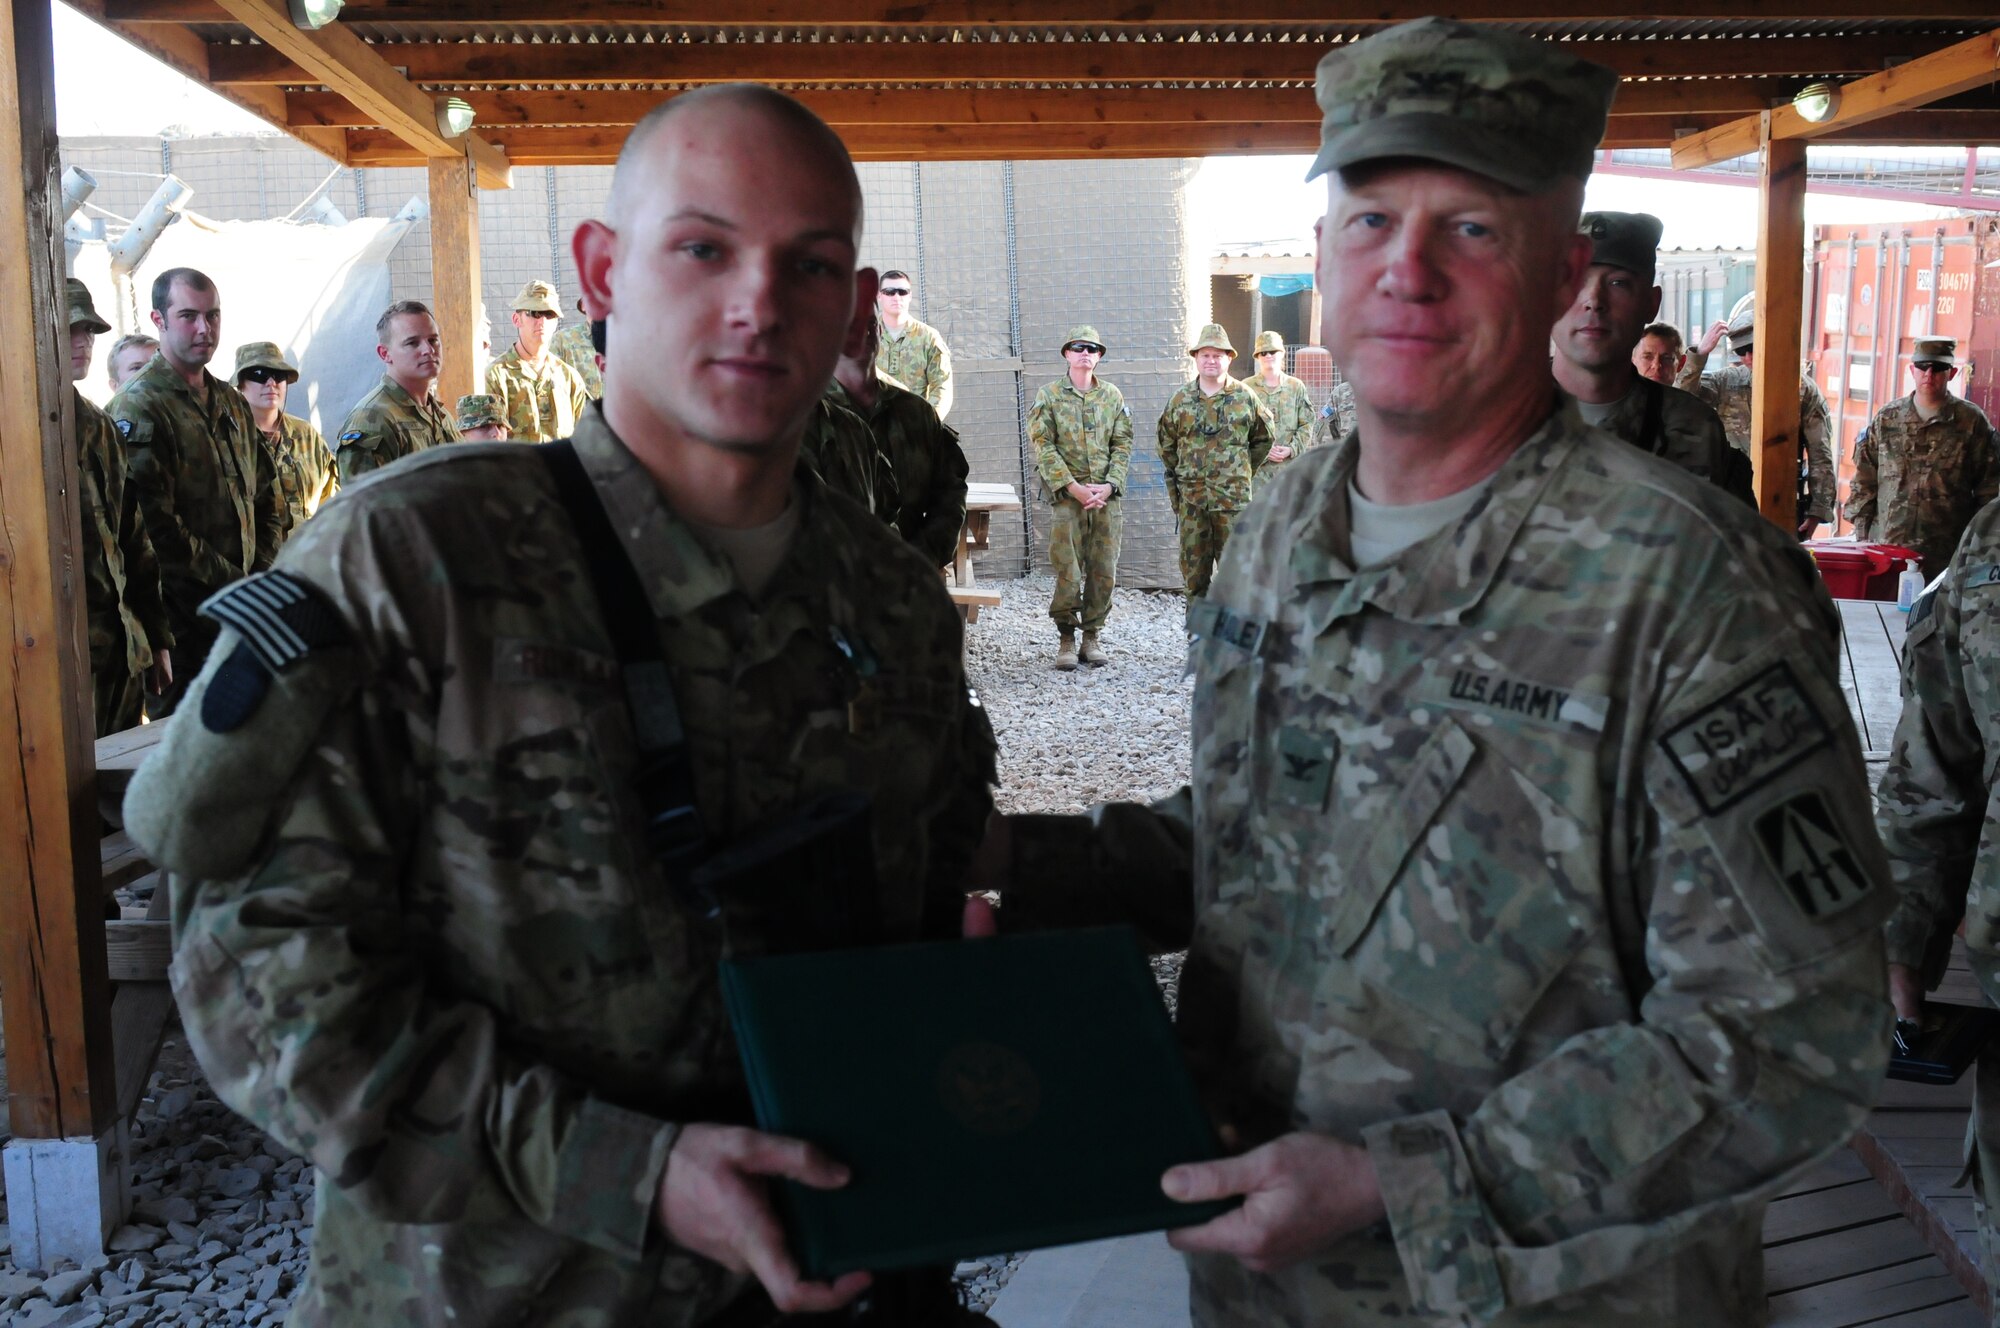 Col. Hadley, commander of the 76th IBCT, presents Airman 1st Class, 113th ASOS, the Army Commendation Medal.